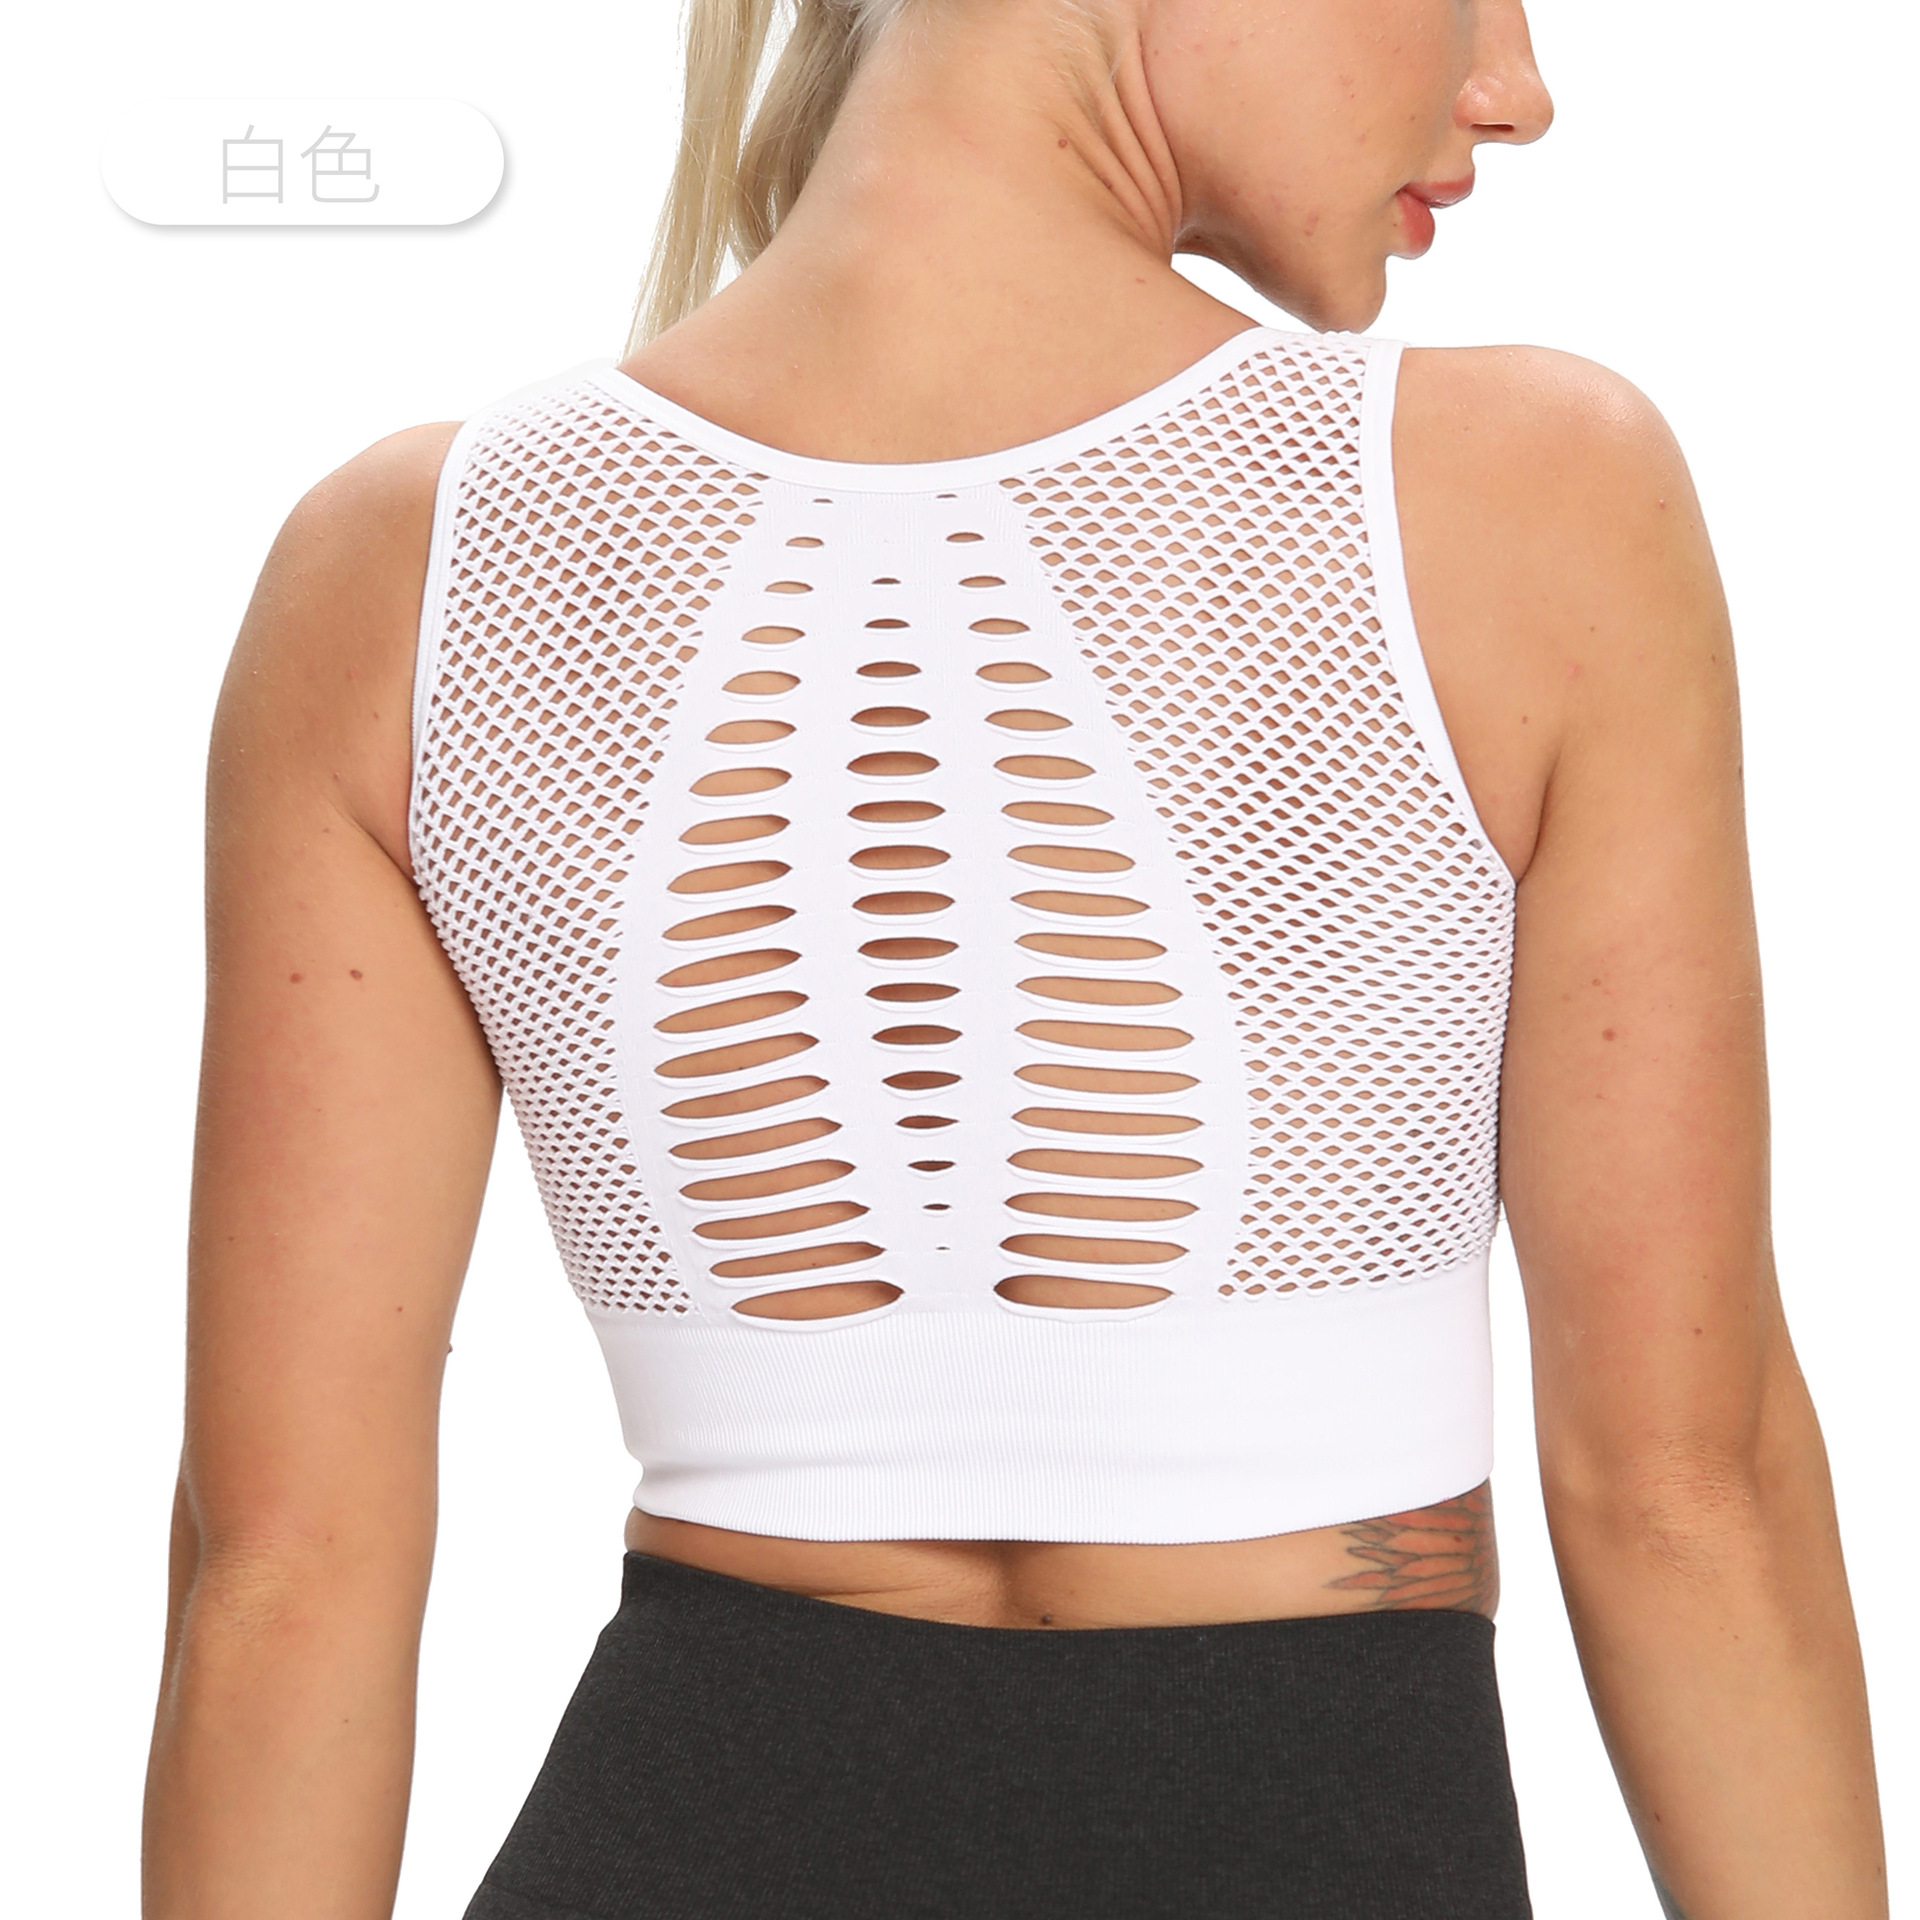 Sexy Cut-out Breathable Mesh Beauty Back Workout Top Seamless Yoga Vest